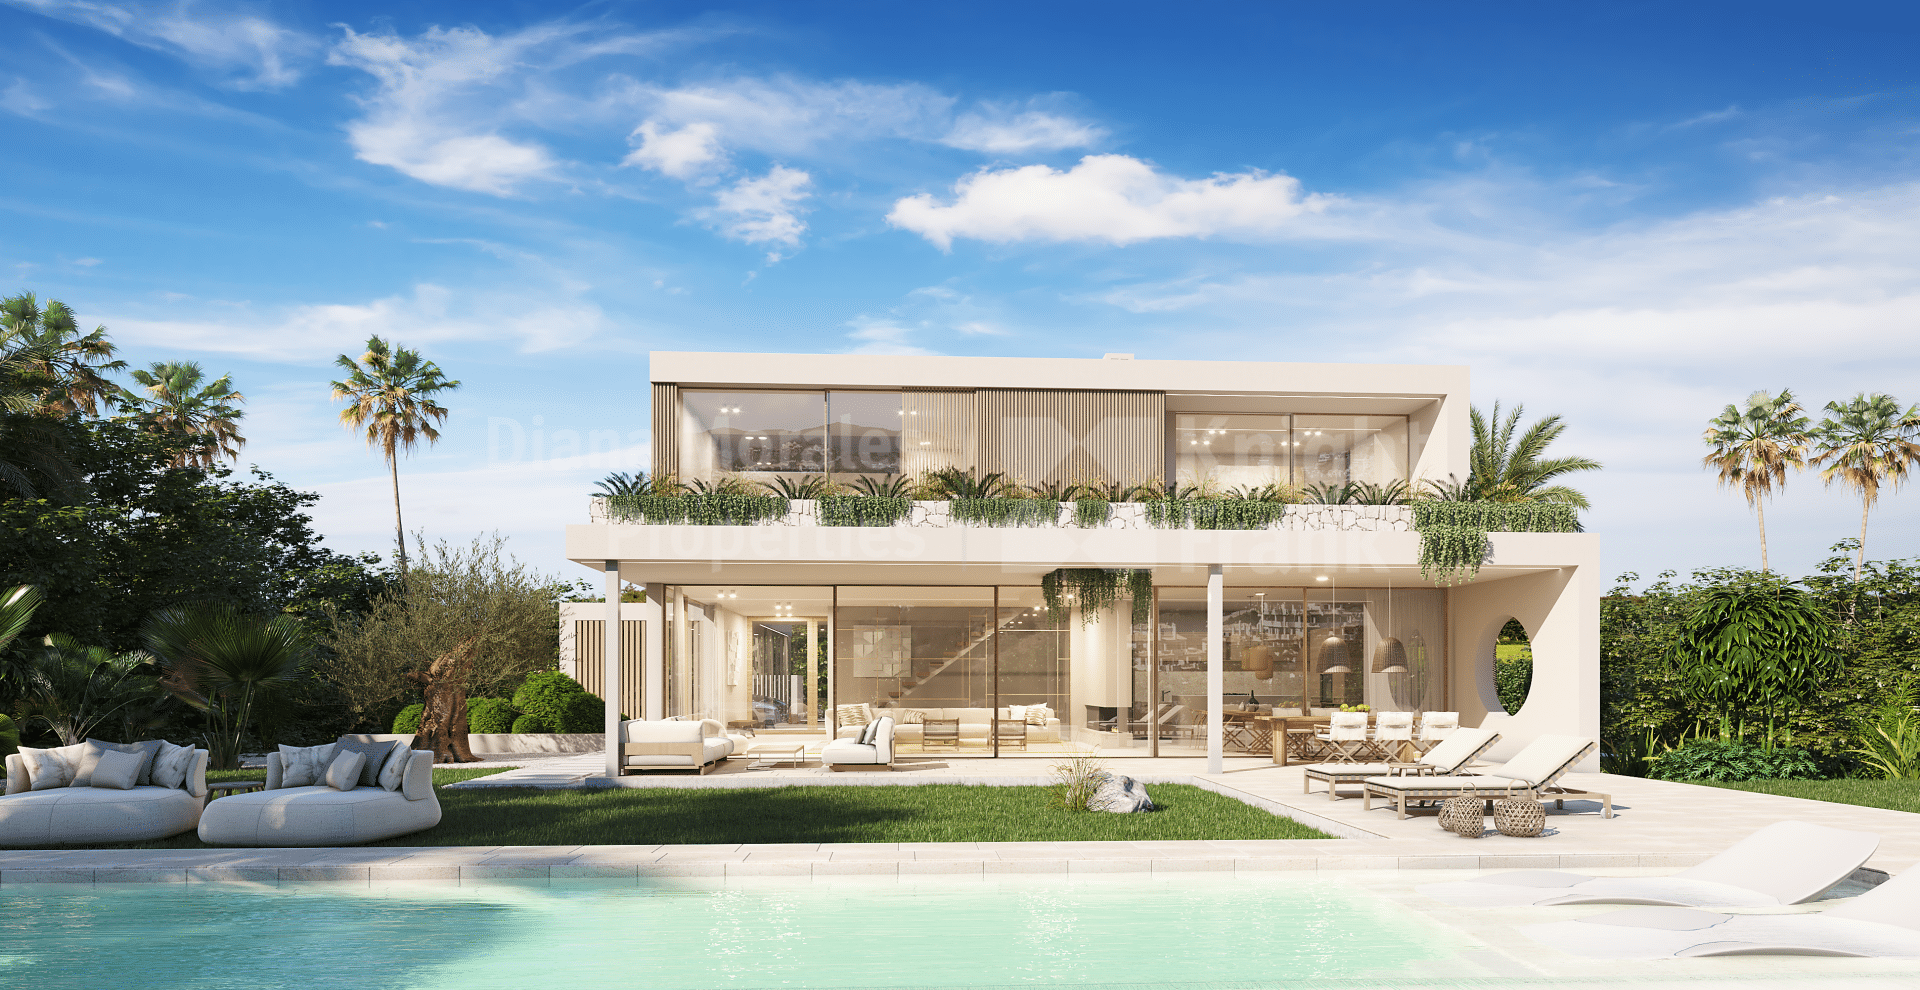 New villa close to golf courses in residential urbanisation